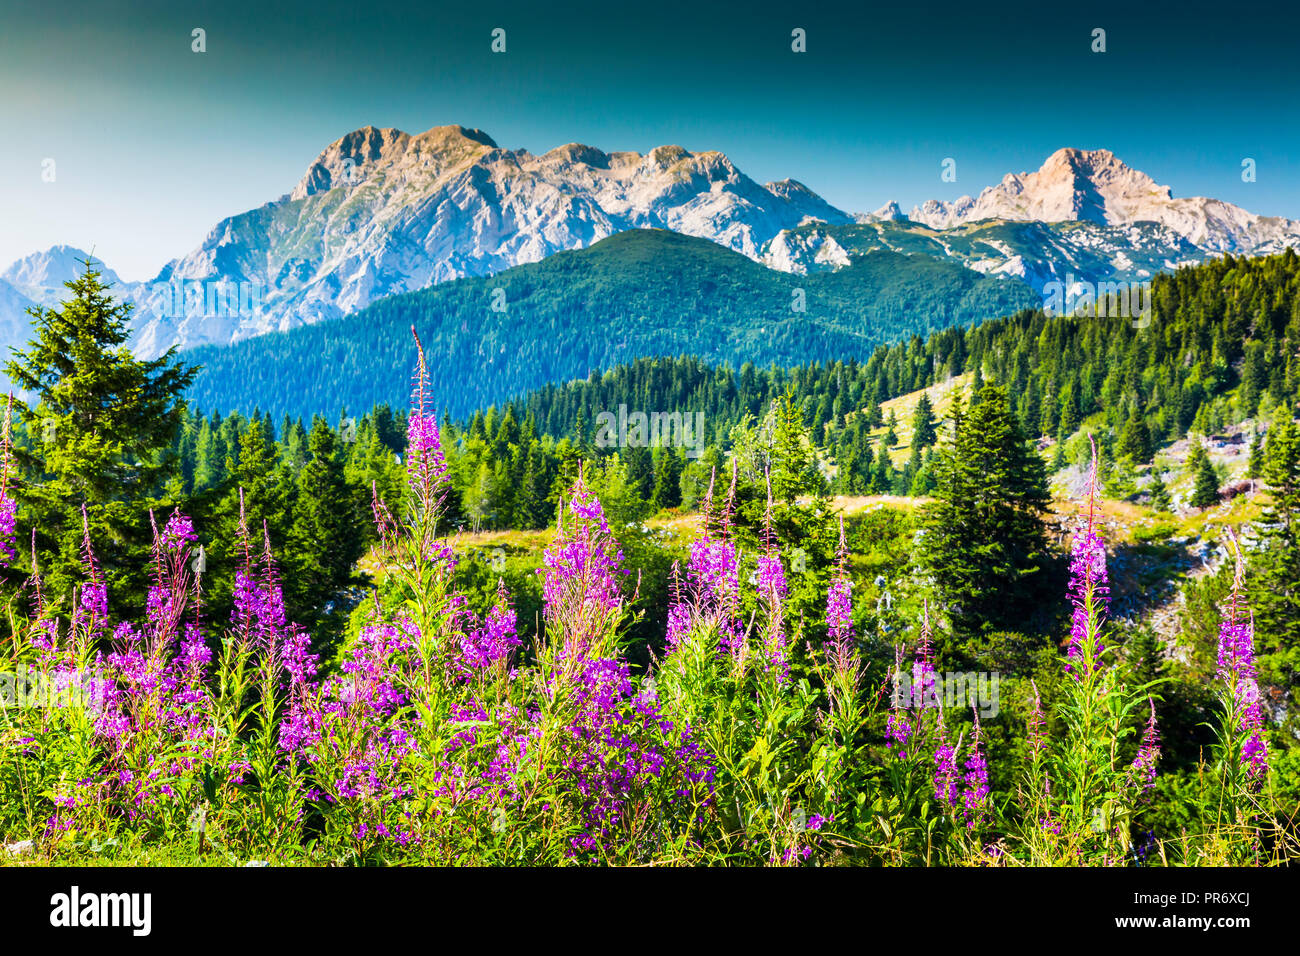 Mountains in summer with flowers. Stock Photo